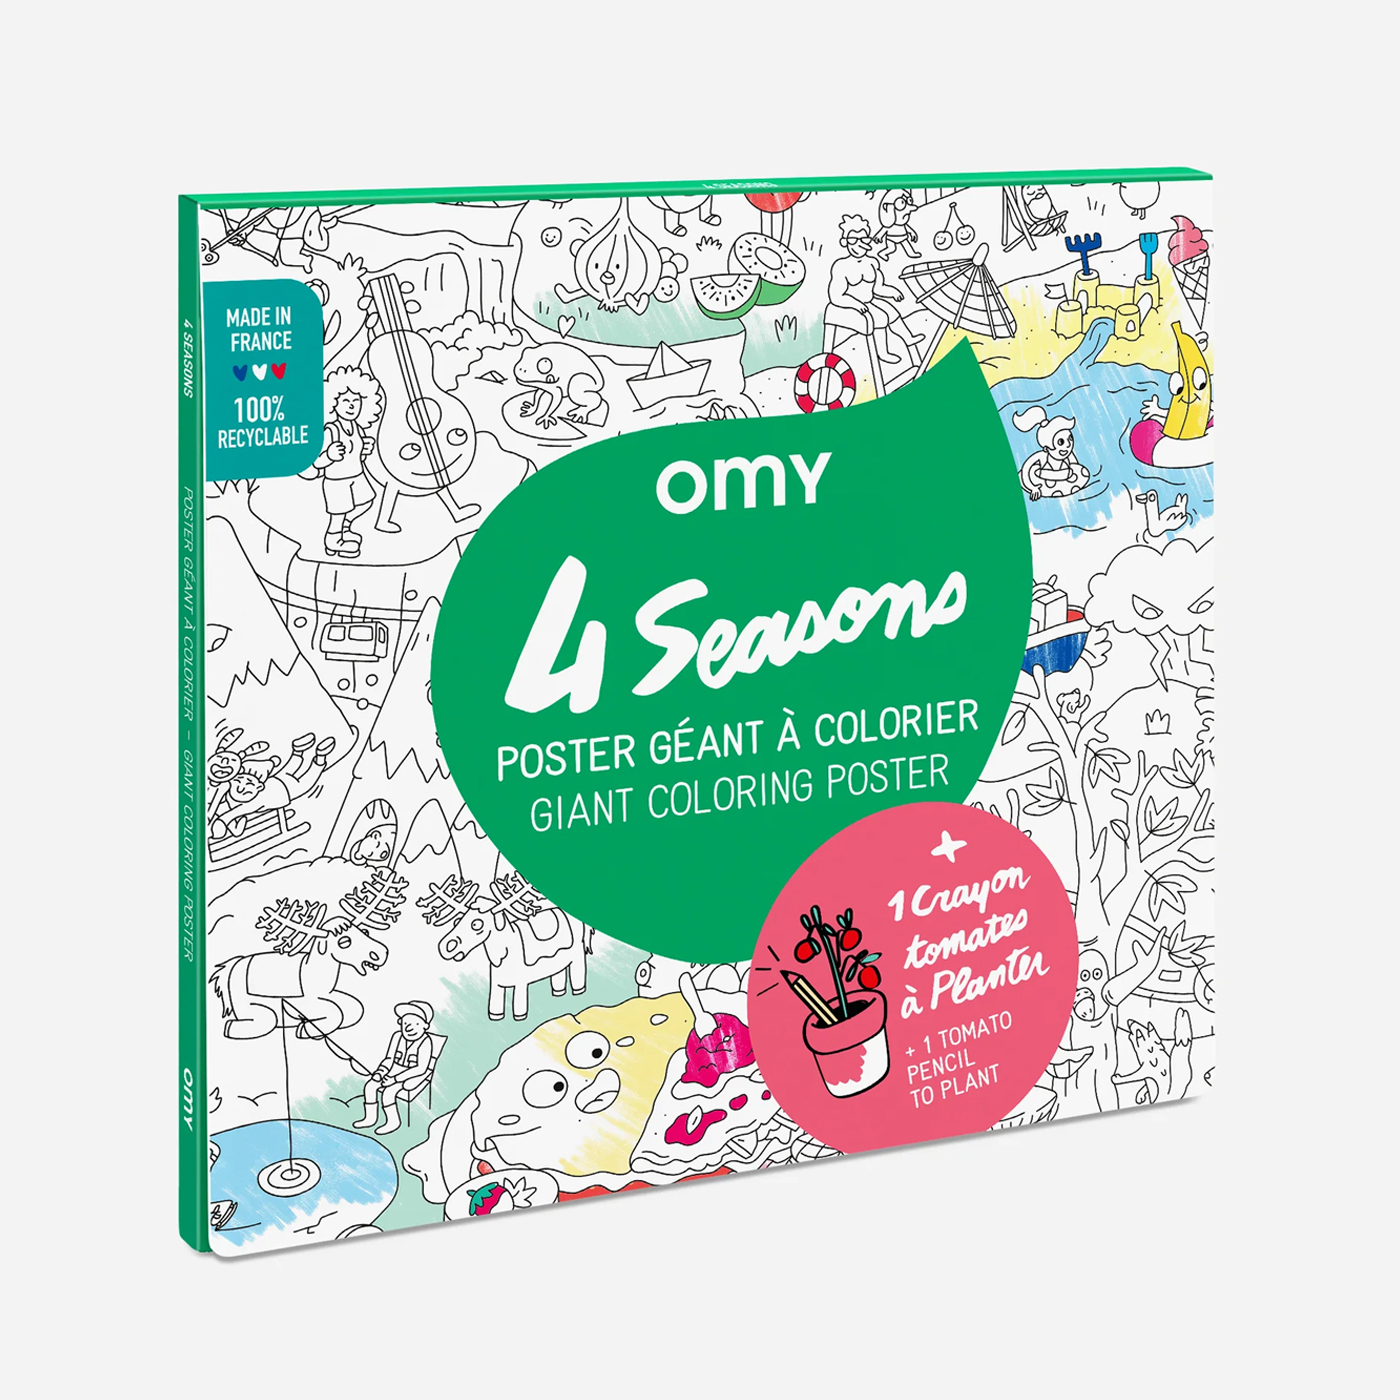 OMY Omy Coloring Poster + Planting Pencil